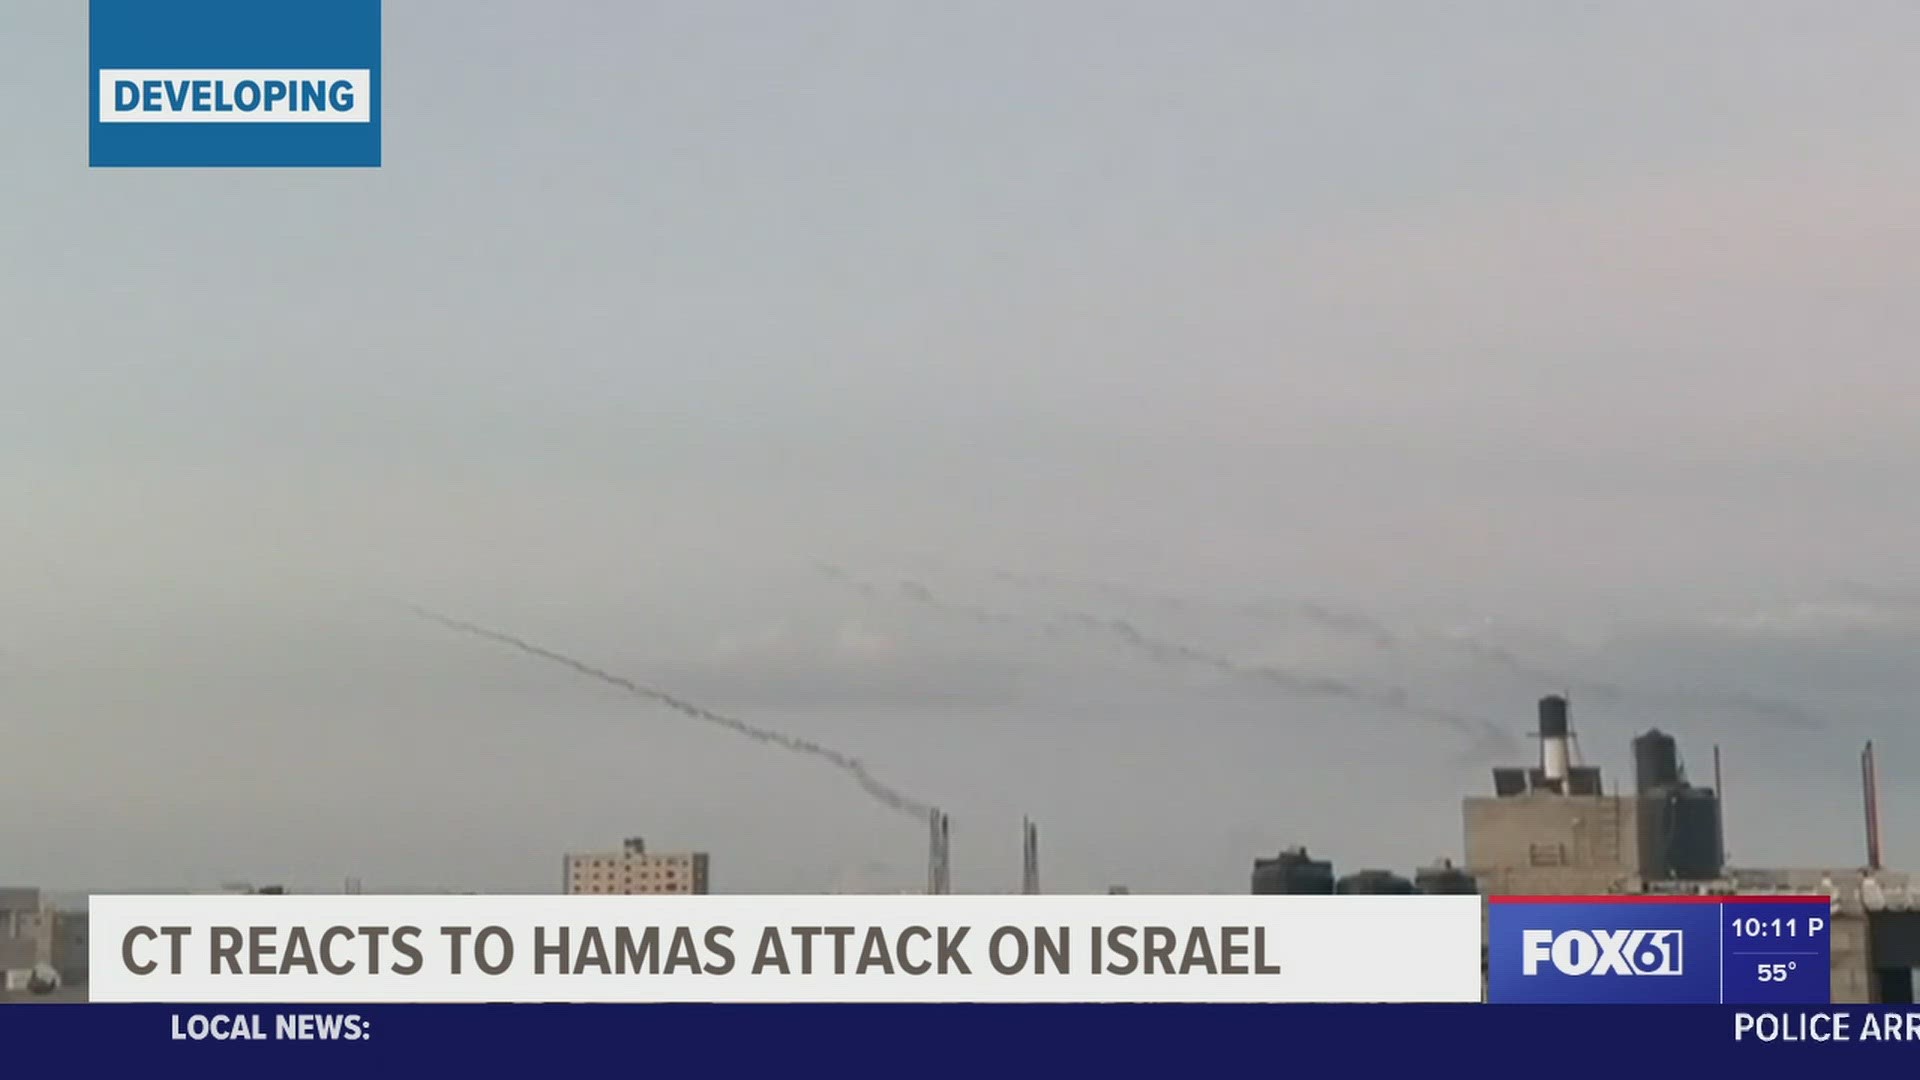 Without warning on Saturday, Gaza's militant Hamas rulers attacked Israel by air, land and sea.